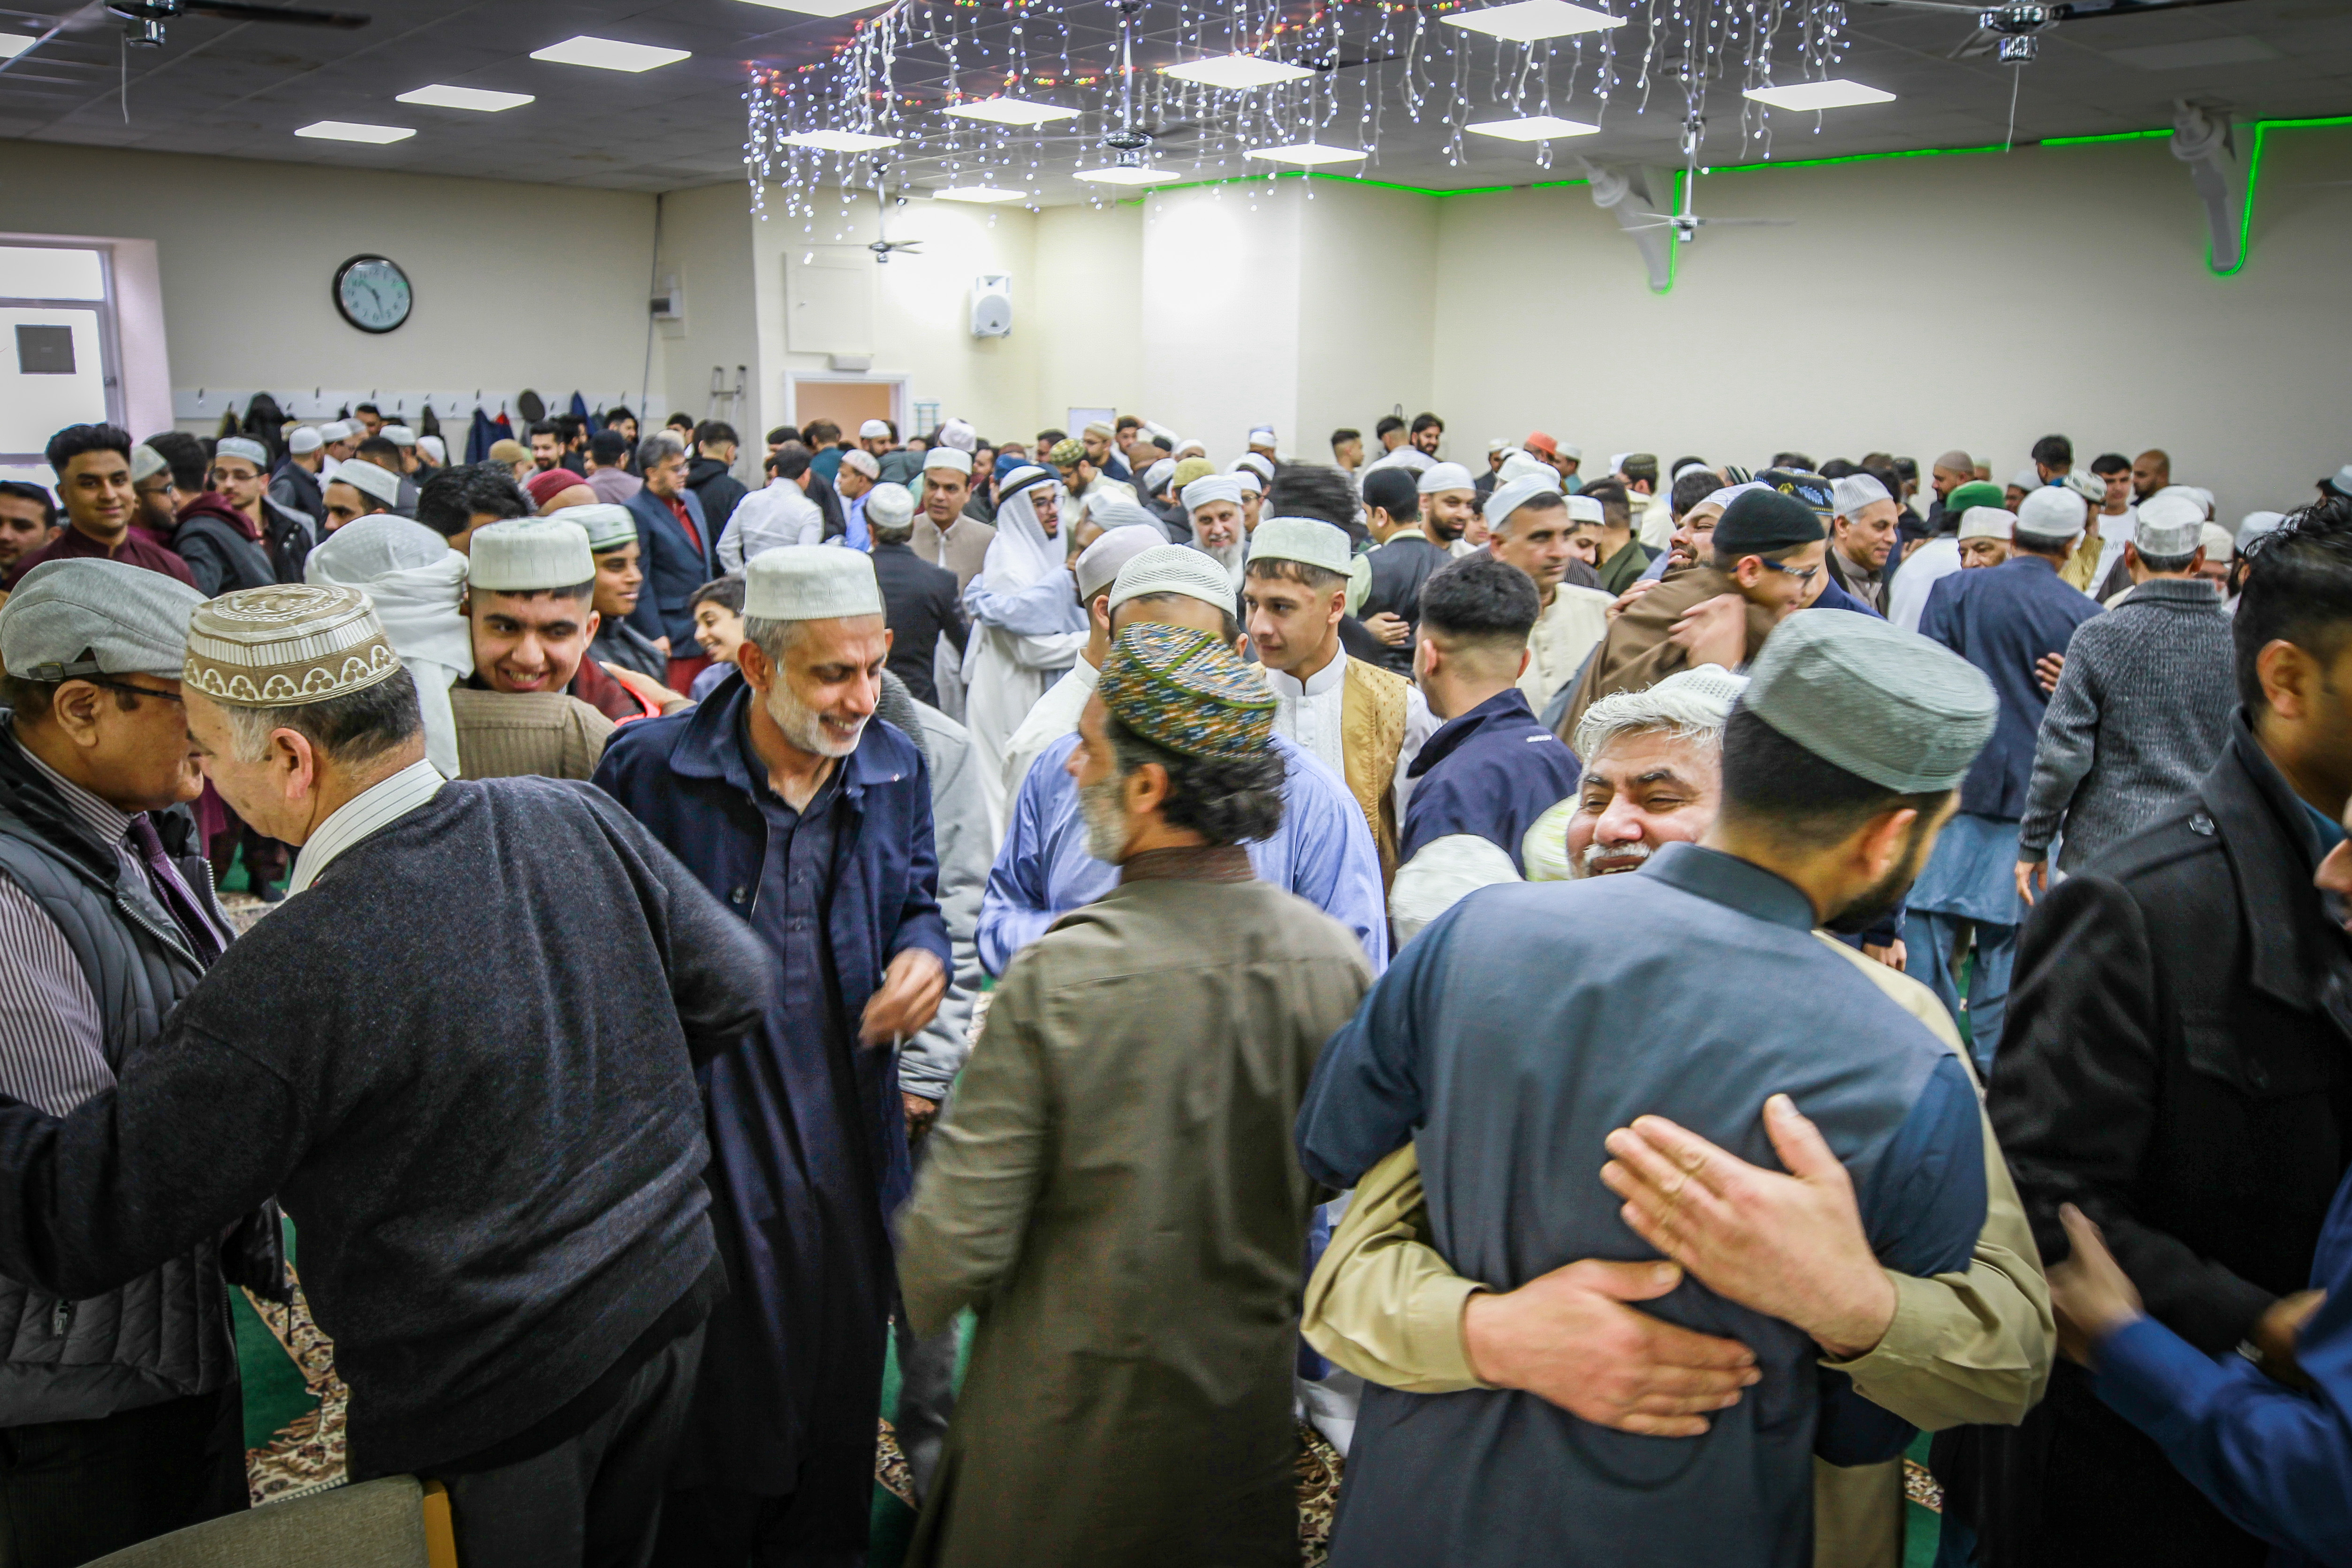 People embrace after prayers and celebrations at Dundee Islamic Society mosque to celebrate Eid.